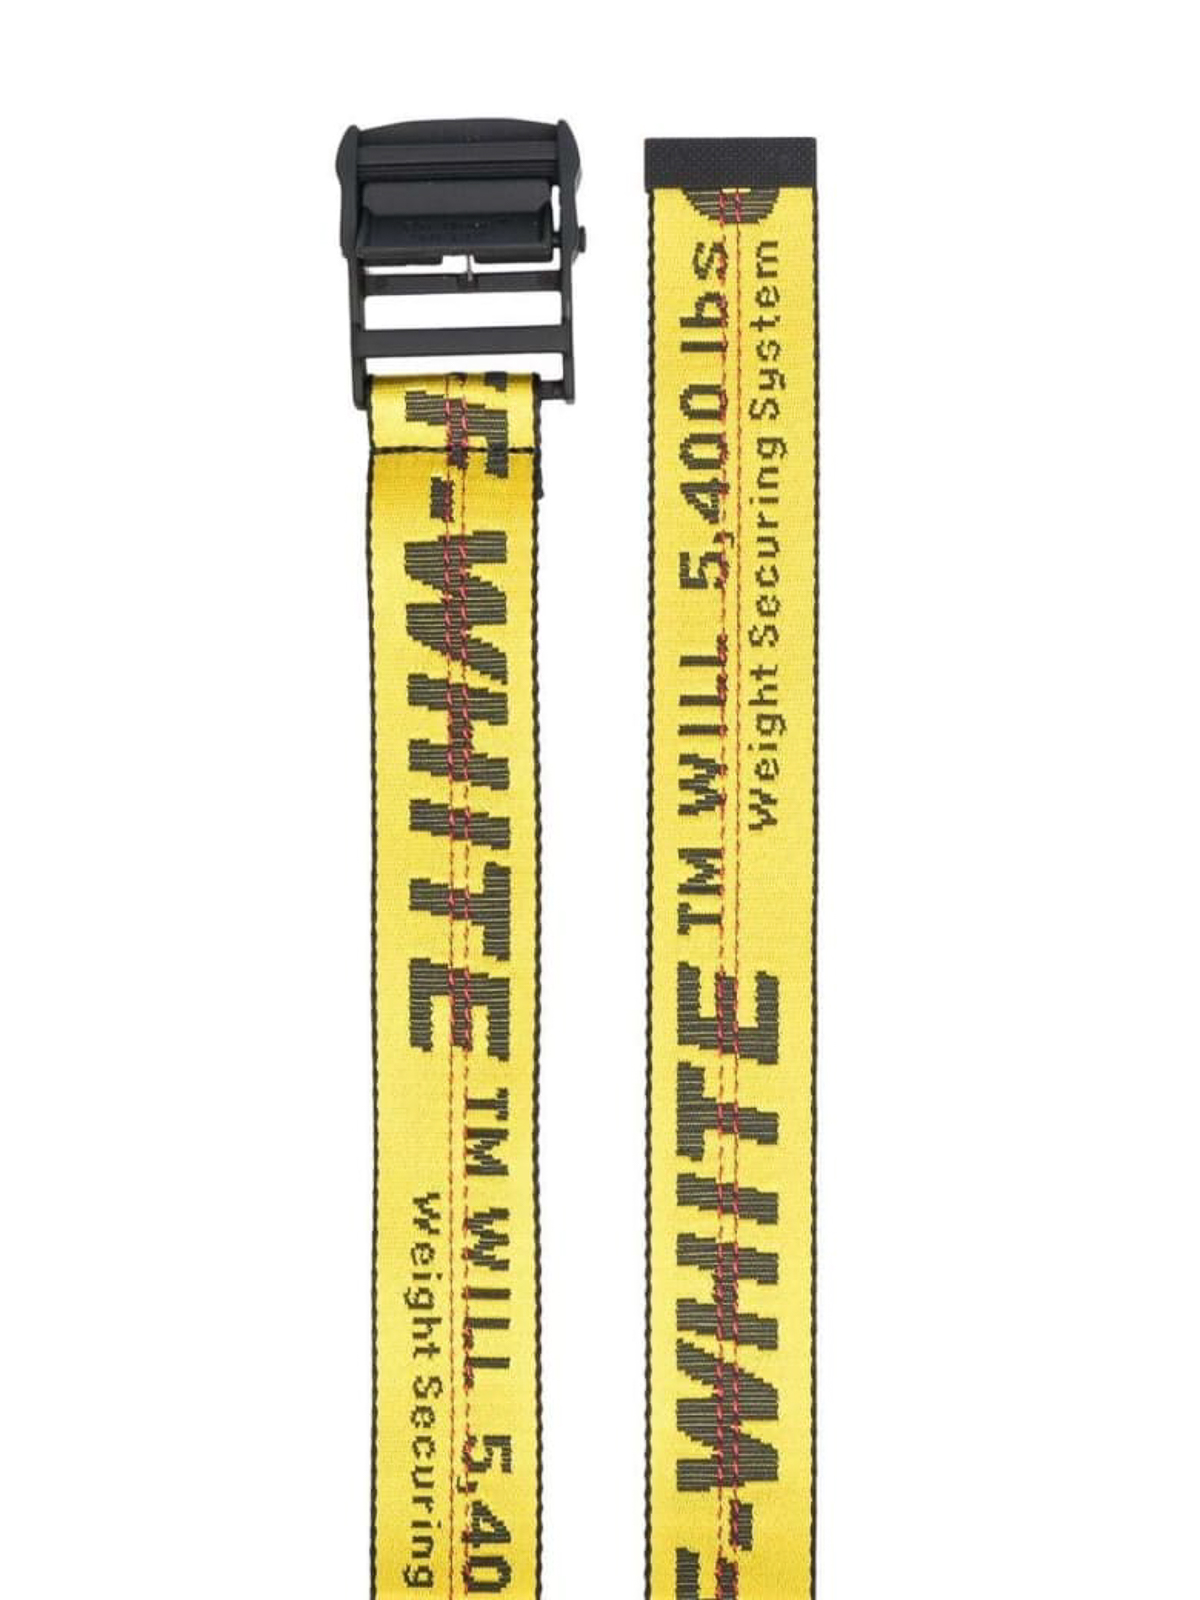 off-white Classic industrial belt